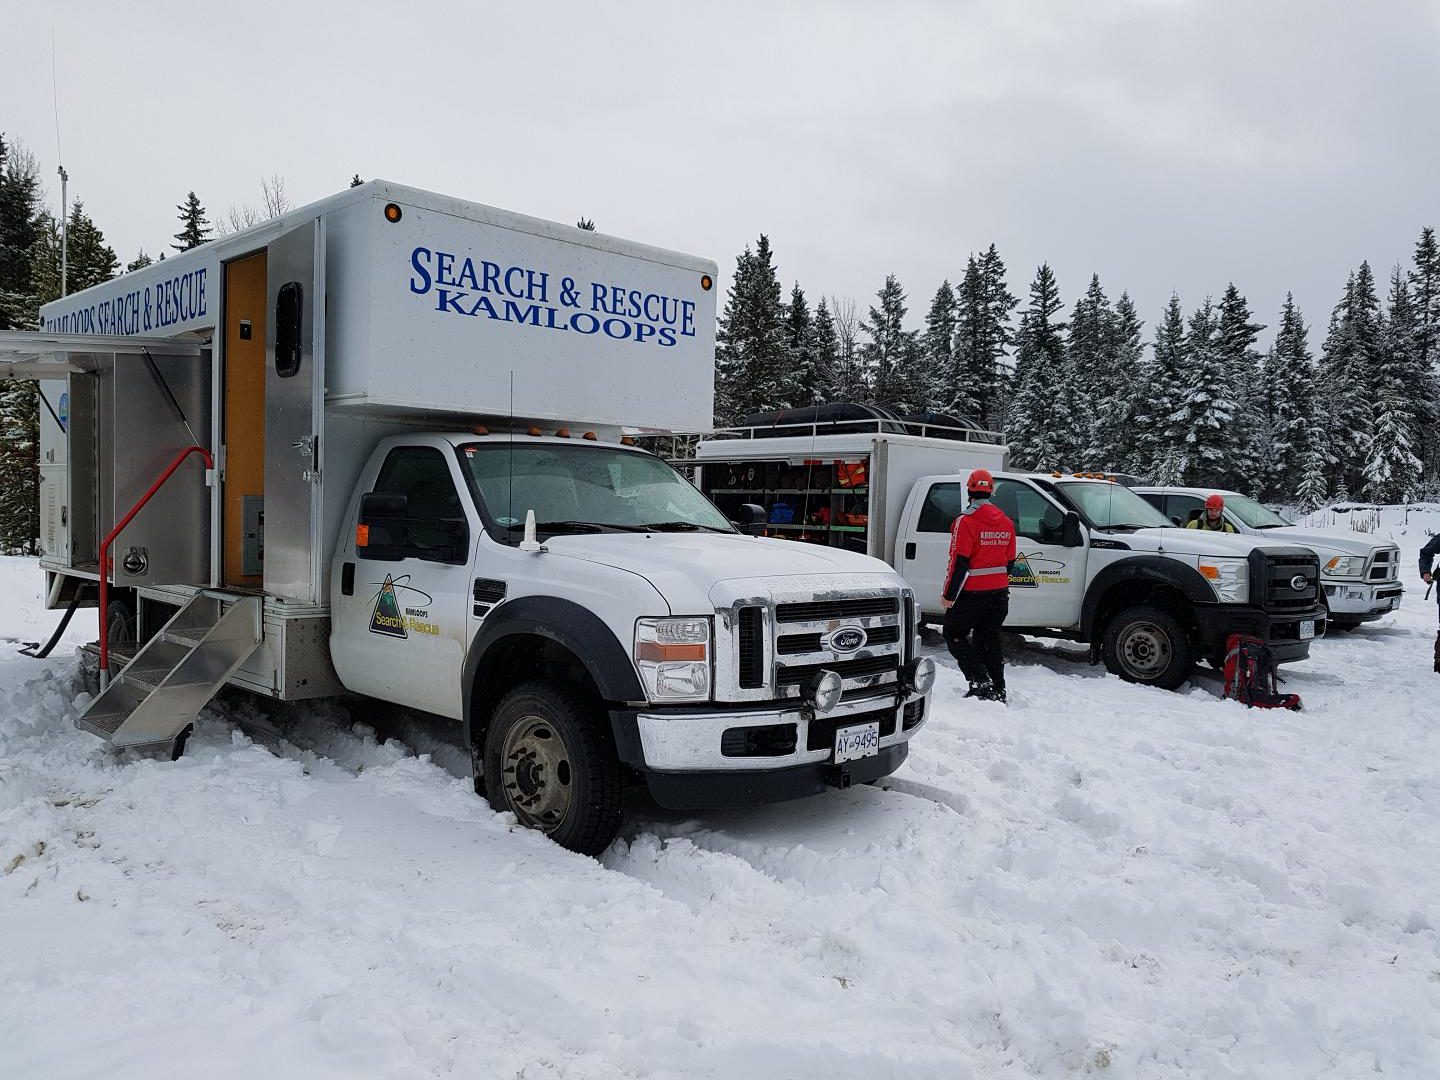 Kamloops Search and Rescue alarmed by unresolved missing persons cases